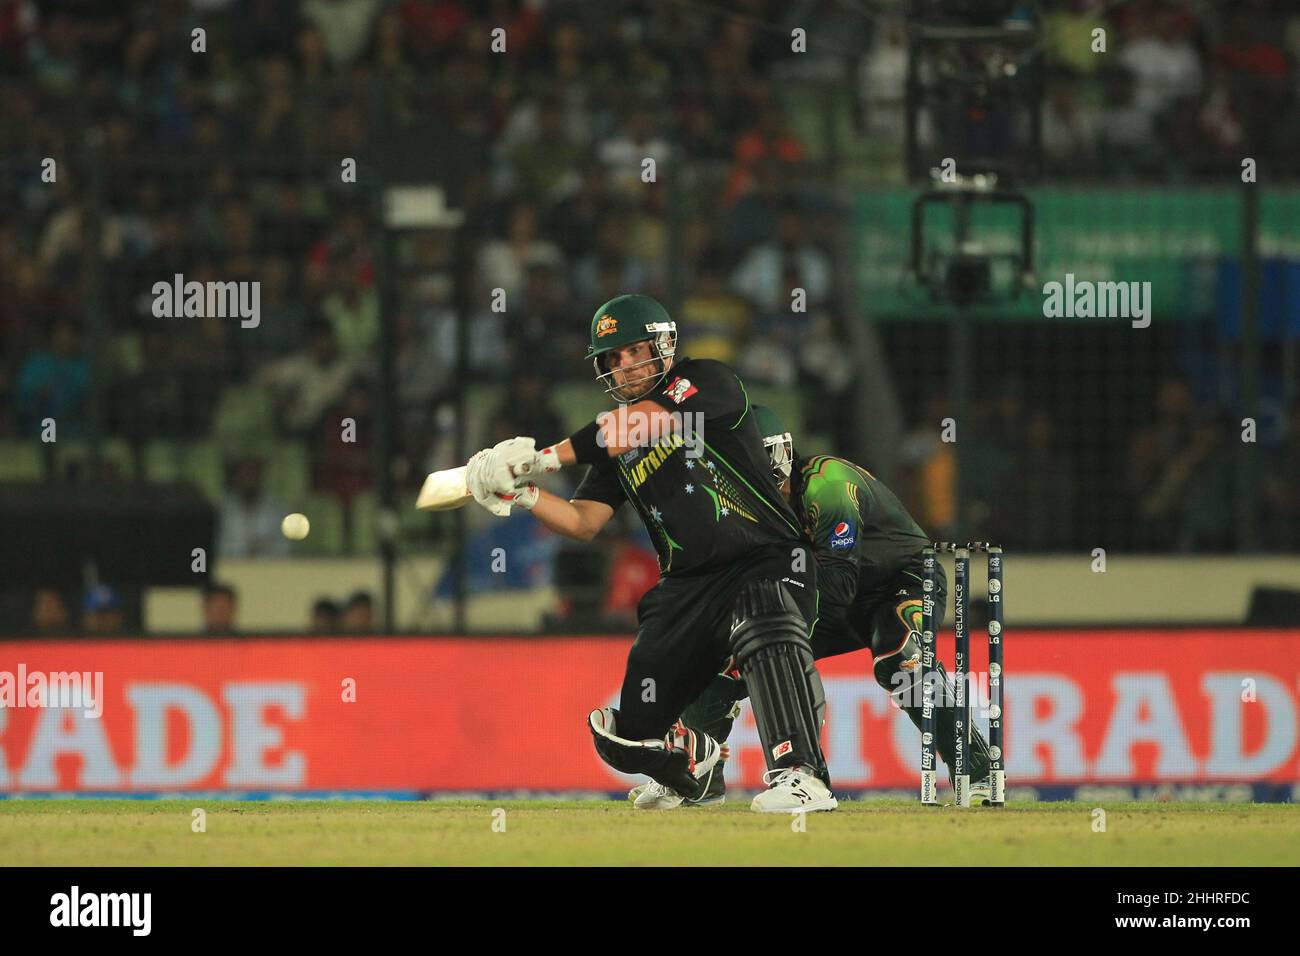 Dhaka, Bangladesh. 23rd Mar, 2014. Australia cricket player, Aaron Finch seen in action during the 16th match, Group 2 ICC (International Cricket Council) Cricket World Cup T20 2014, between Pakistan vs Australia at Sher-e-Bangla National Stadium, Mirpur.Pakistan won by 16 runs. (Photo by Md Manik/SOPA Images/Sipa USA) Credit: Sipa USA/Alamy Live News Stock Photo